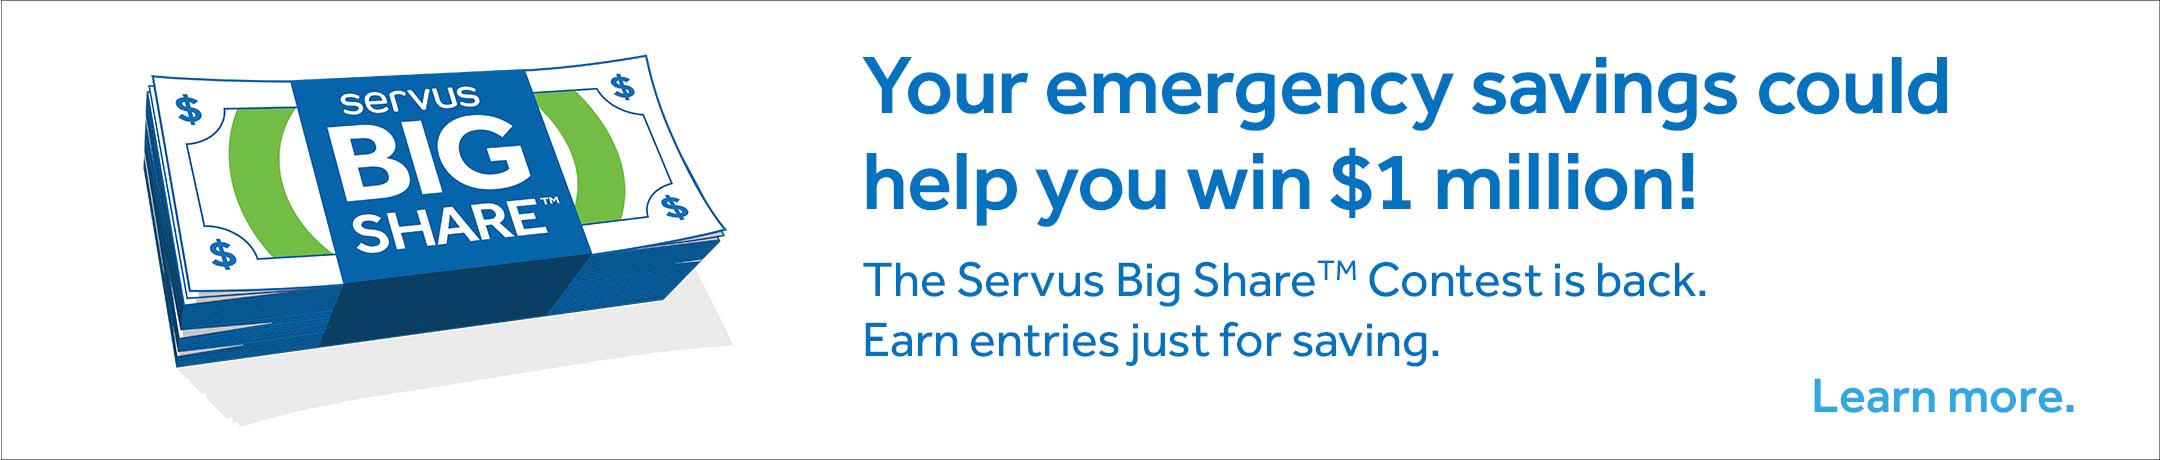 Your emergency savings could help you win $1 million! The Servus Big Share Contest is back. Earn entries just for saving. Learn more.